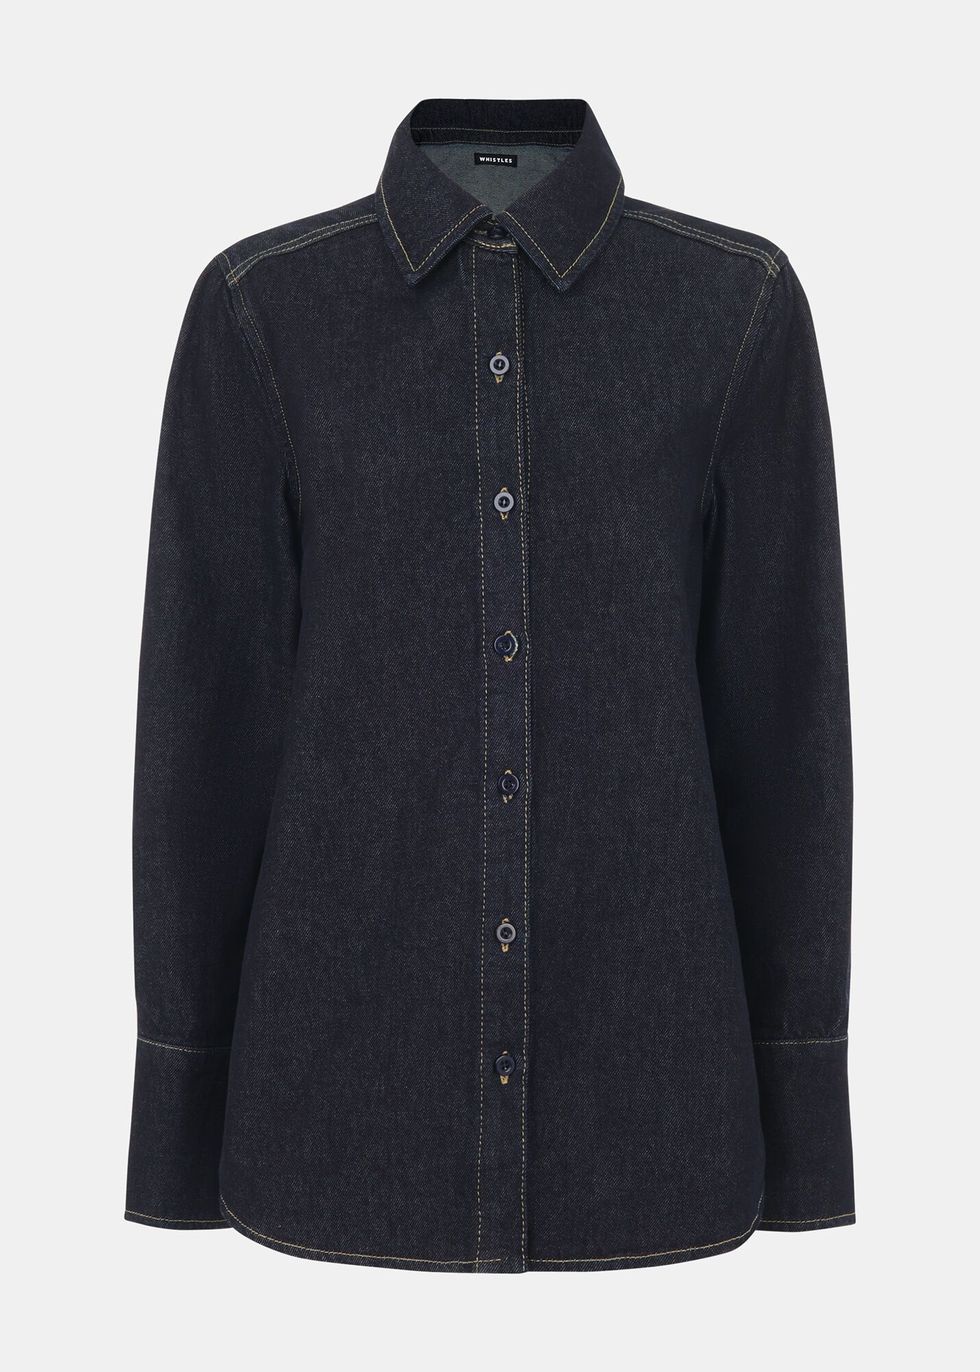 The best denim shirts to shop now